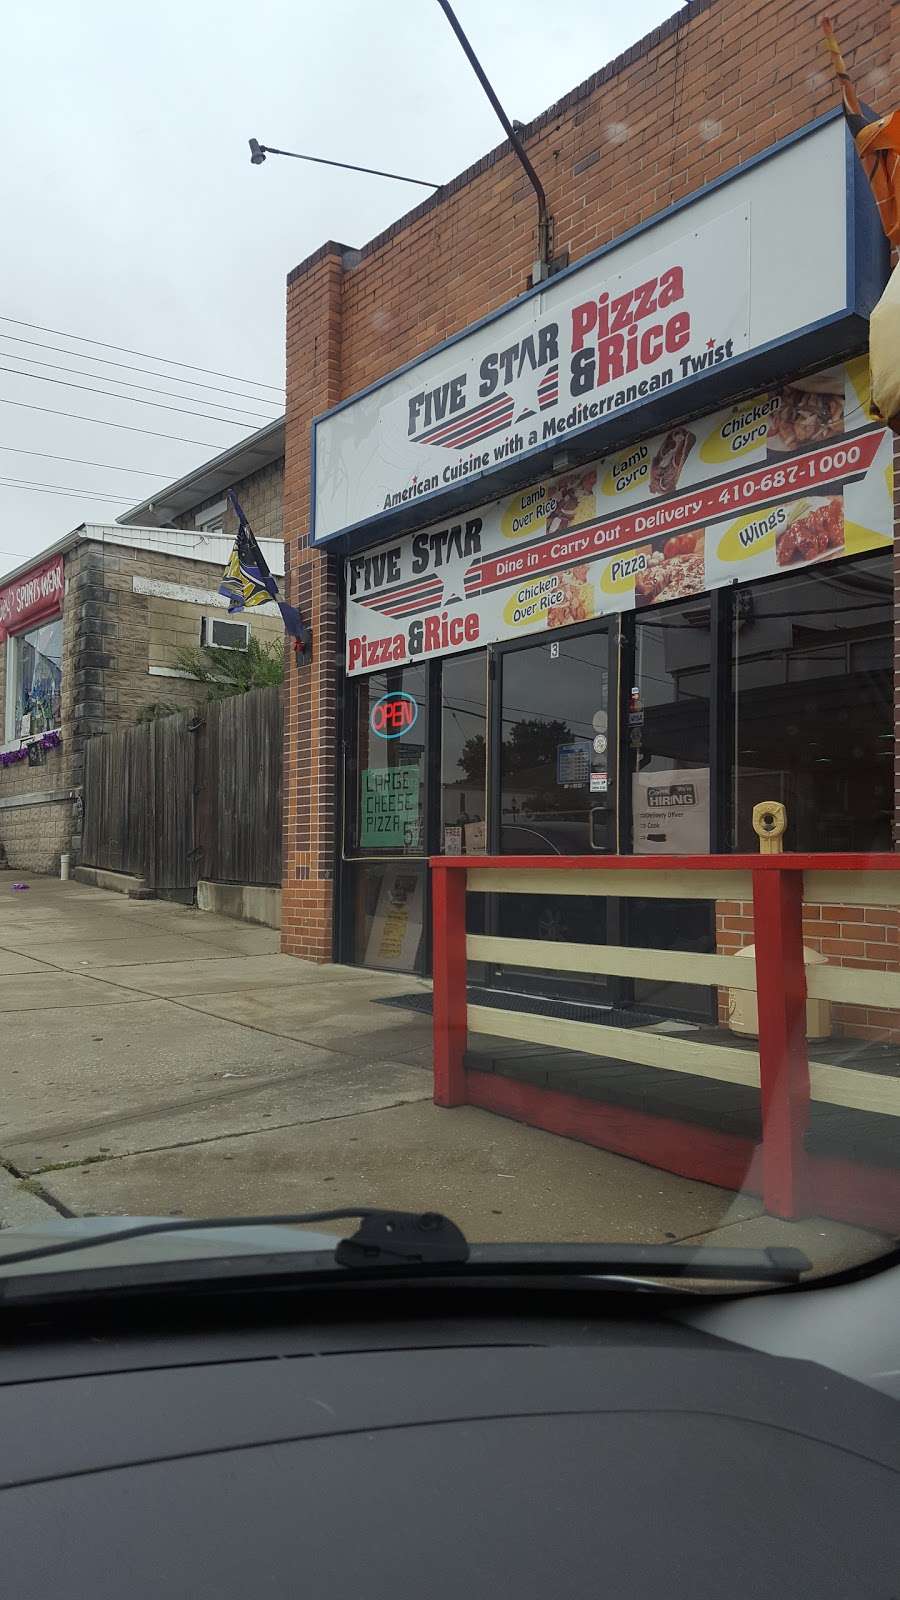 Five Star Pizza & Rice | 3 Margaret Ave, Essex, MD 21221 | Phone: (410) 687-1000